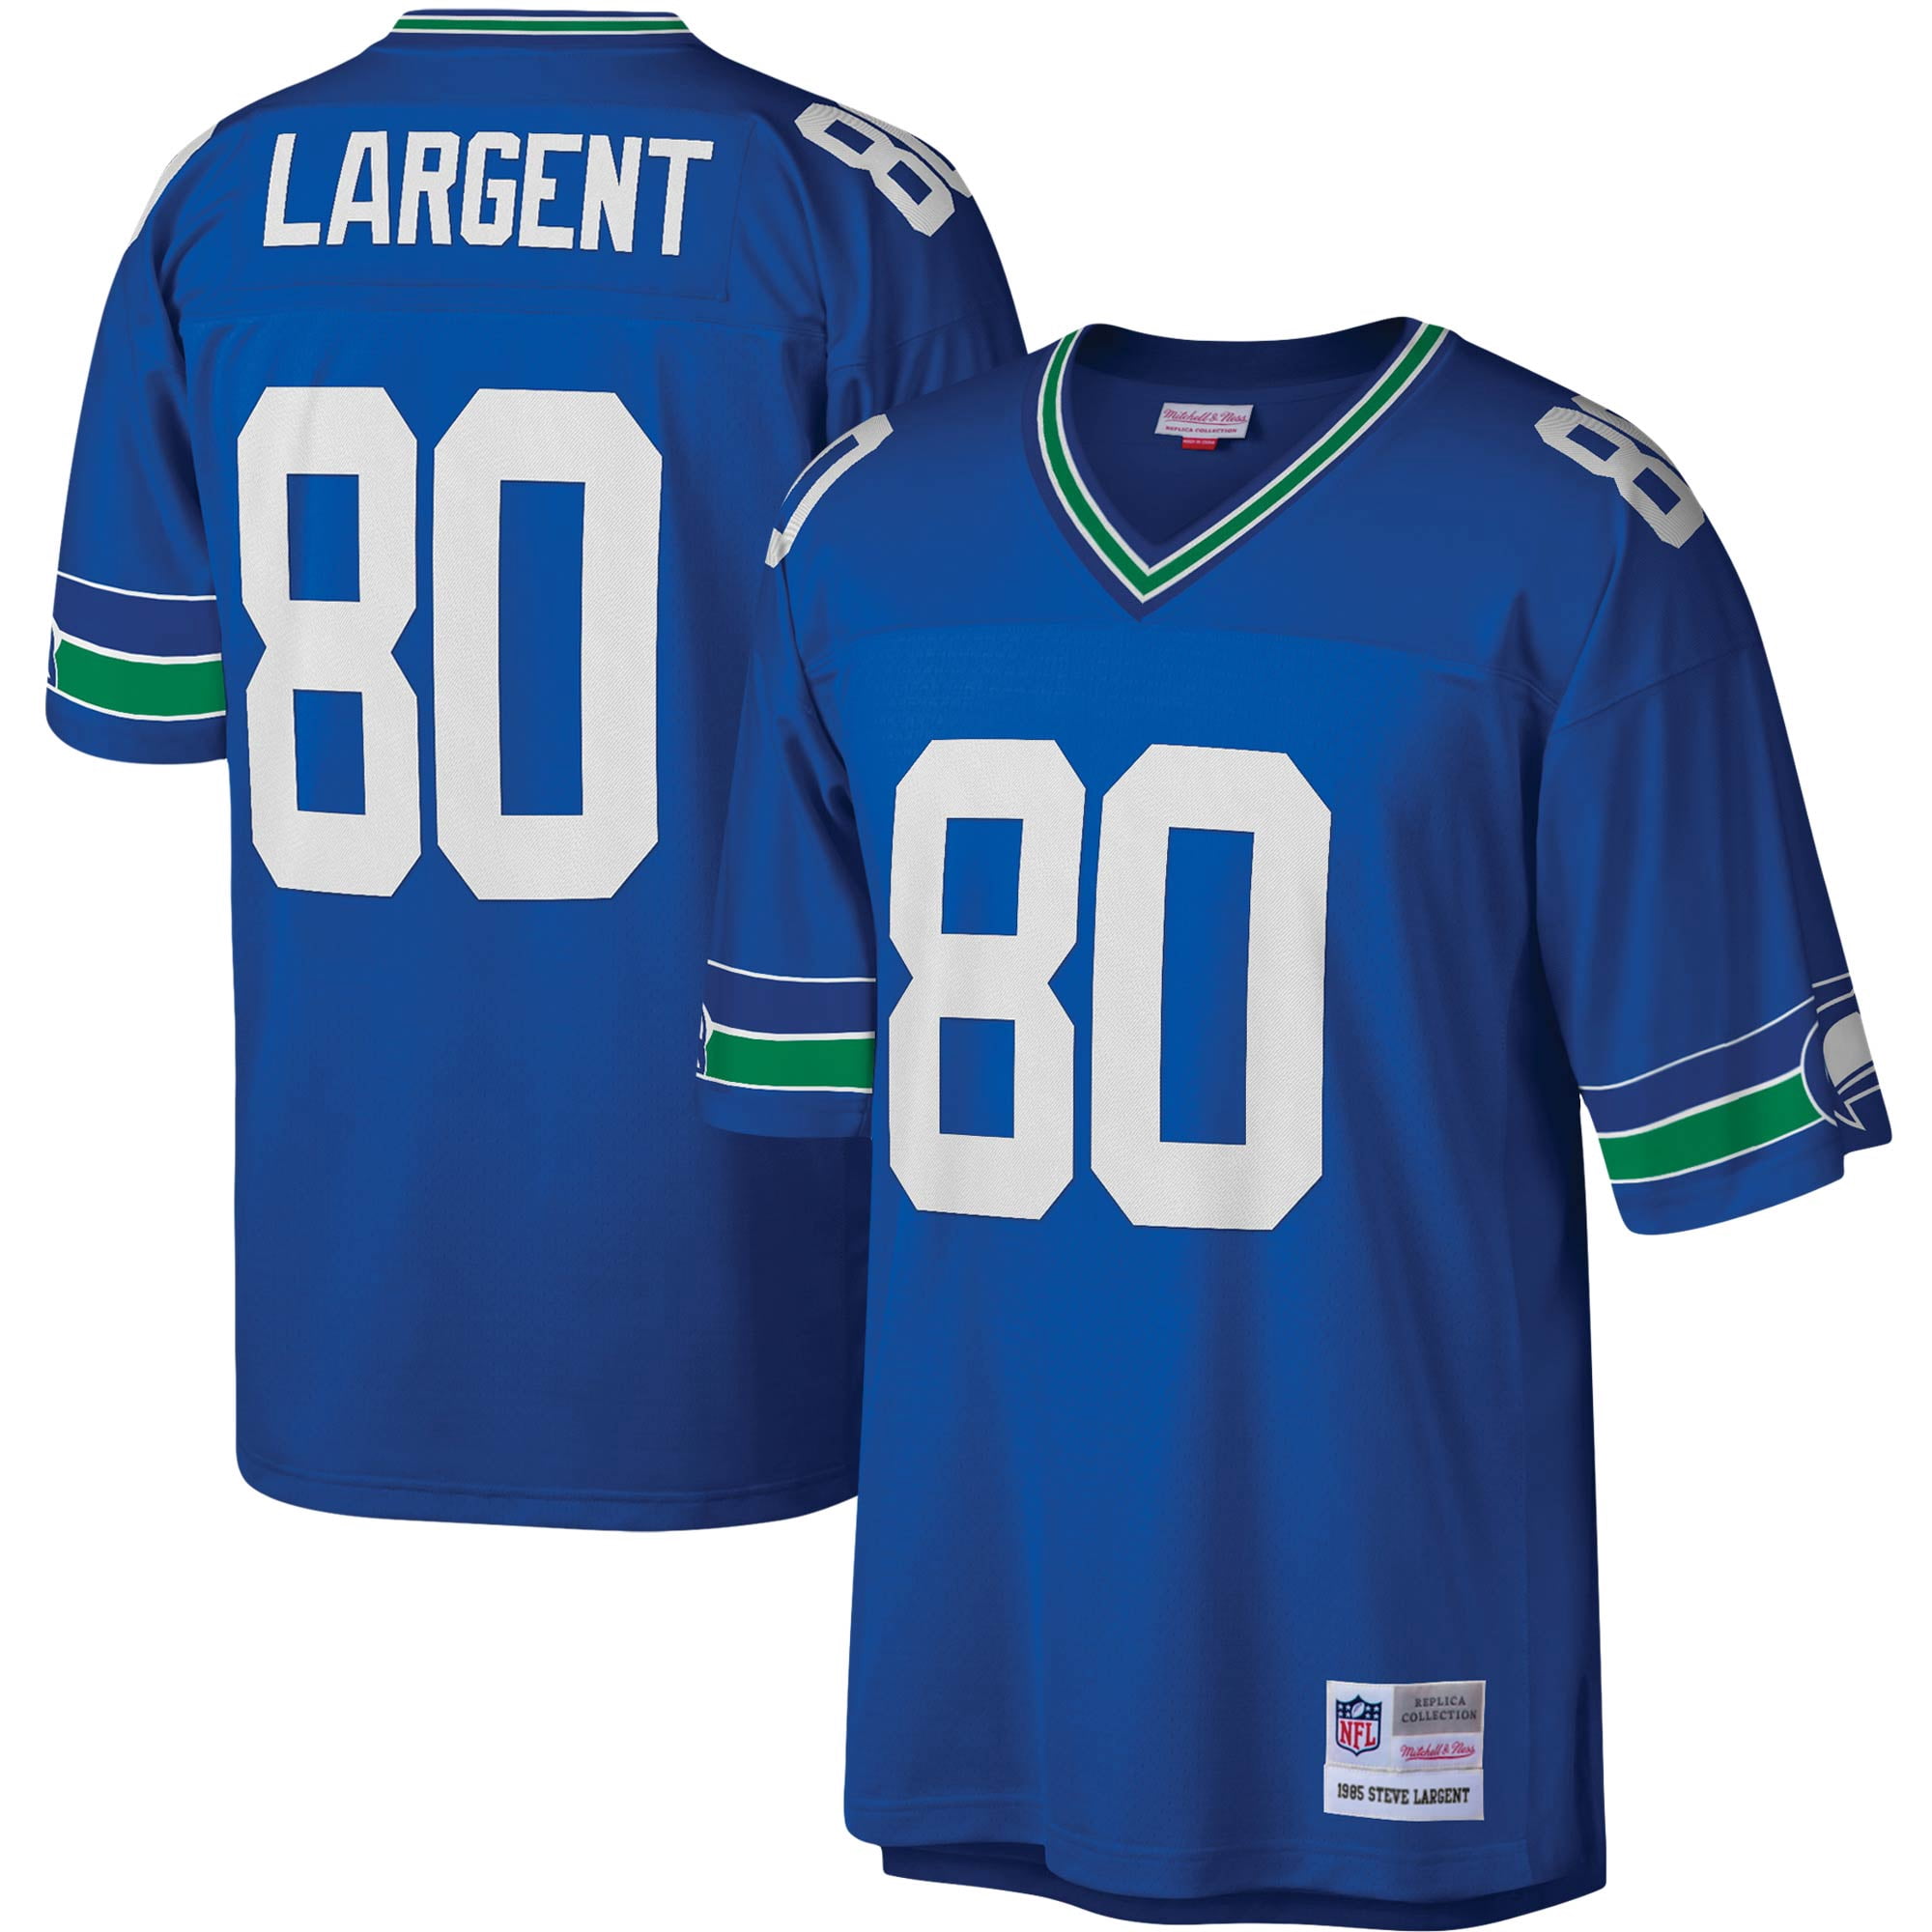 Steve Largent Seattle Seahawks Autographed Blue Authentic Mitchell & Ness  Jersey with HOF 95 Inscription